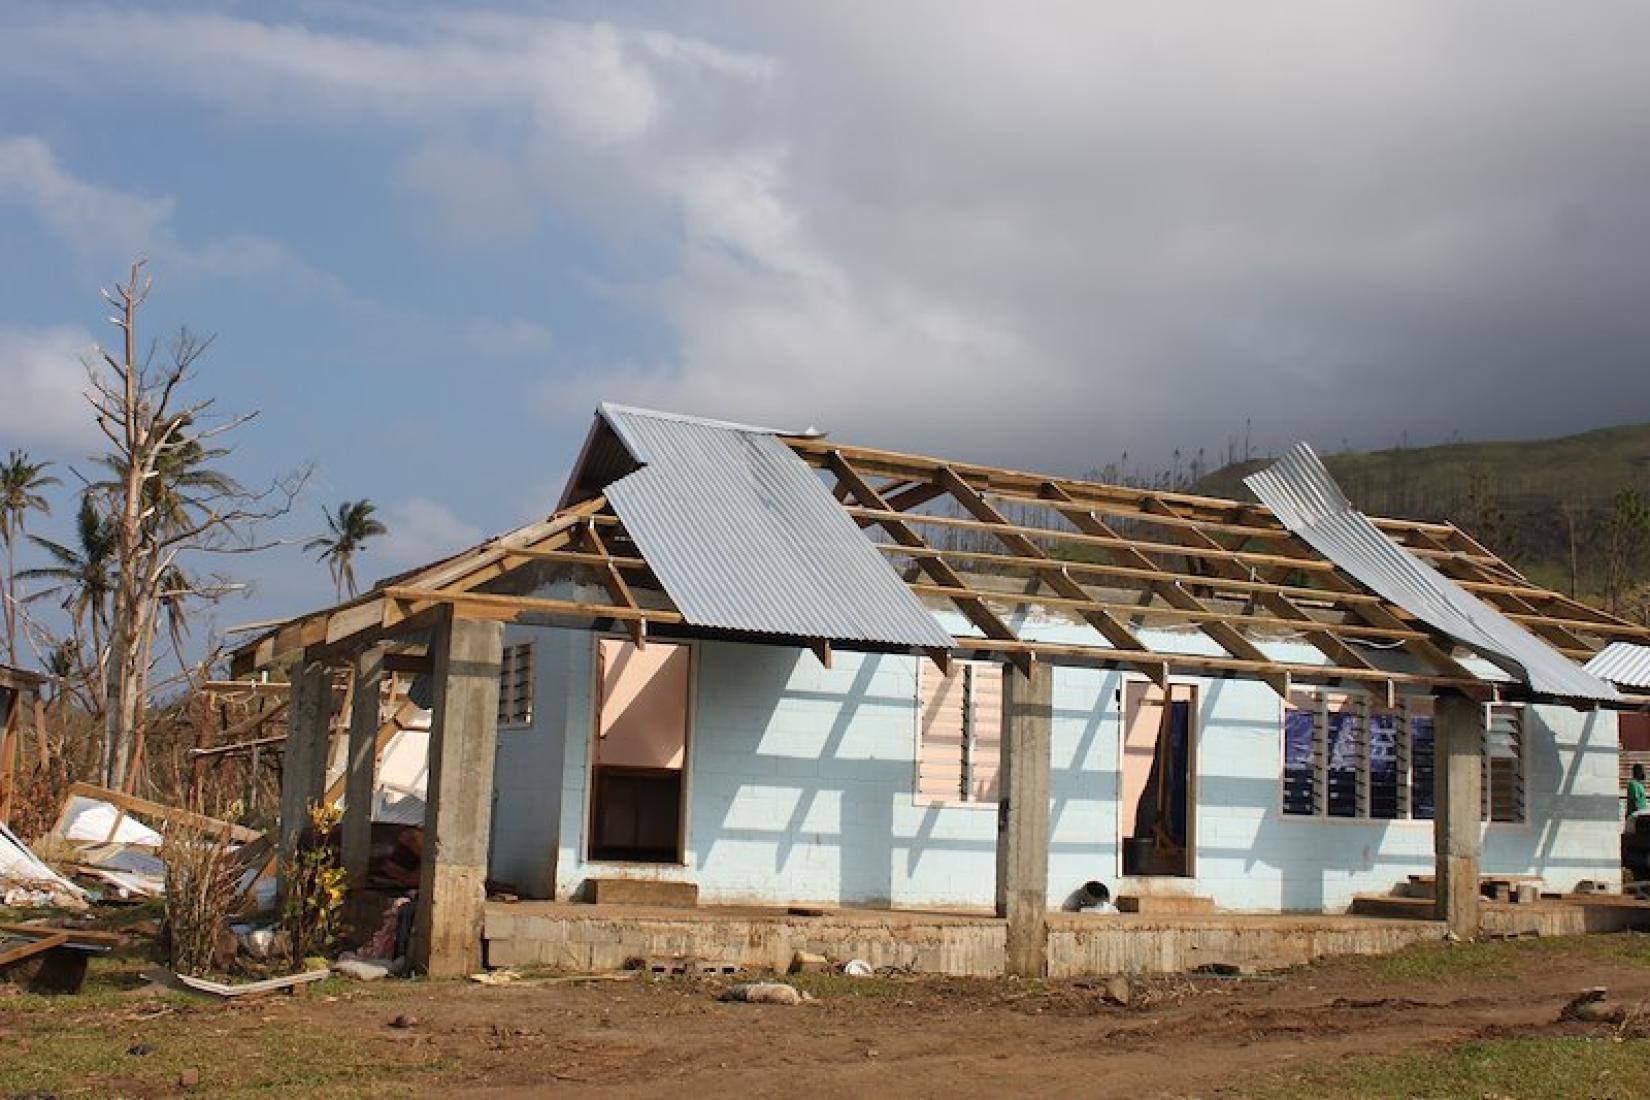 Damage from tropical cyclone Winston that struck Fiji in 2016. Image: DFAT